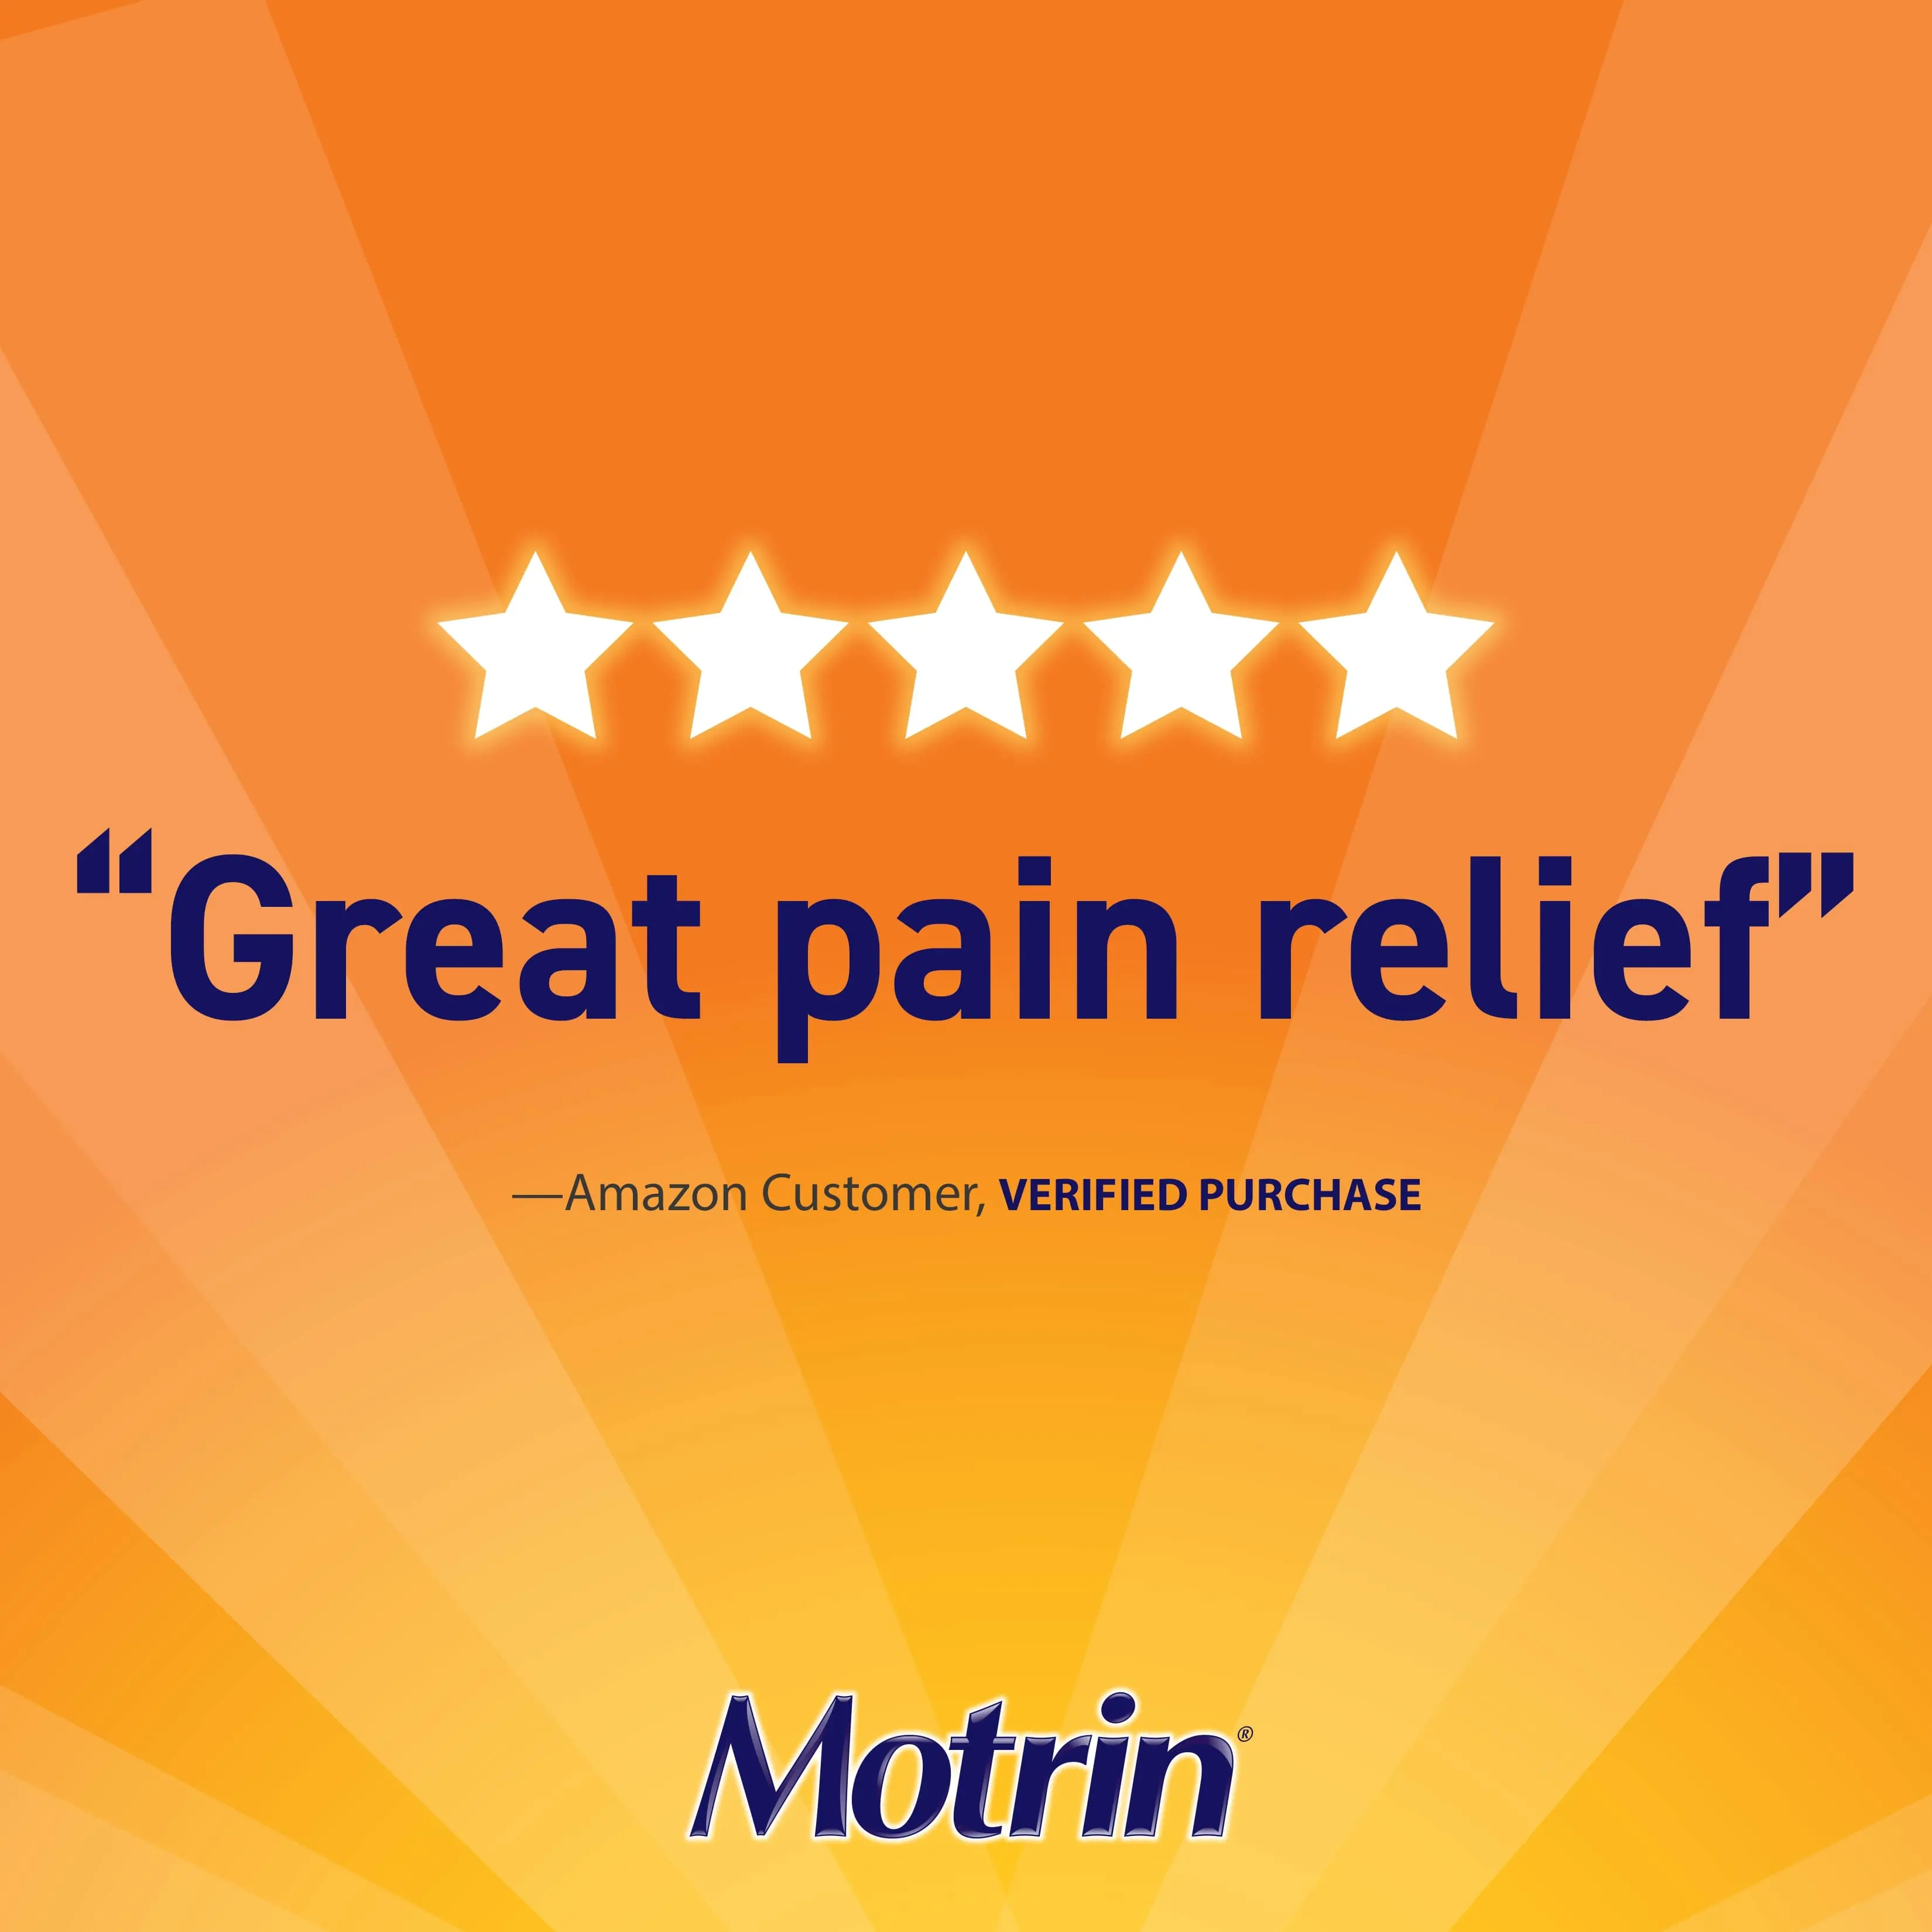 Motrin "great pain relief" review